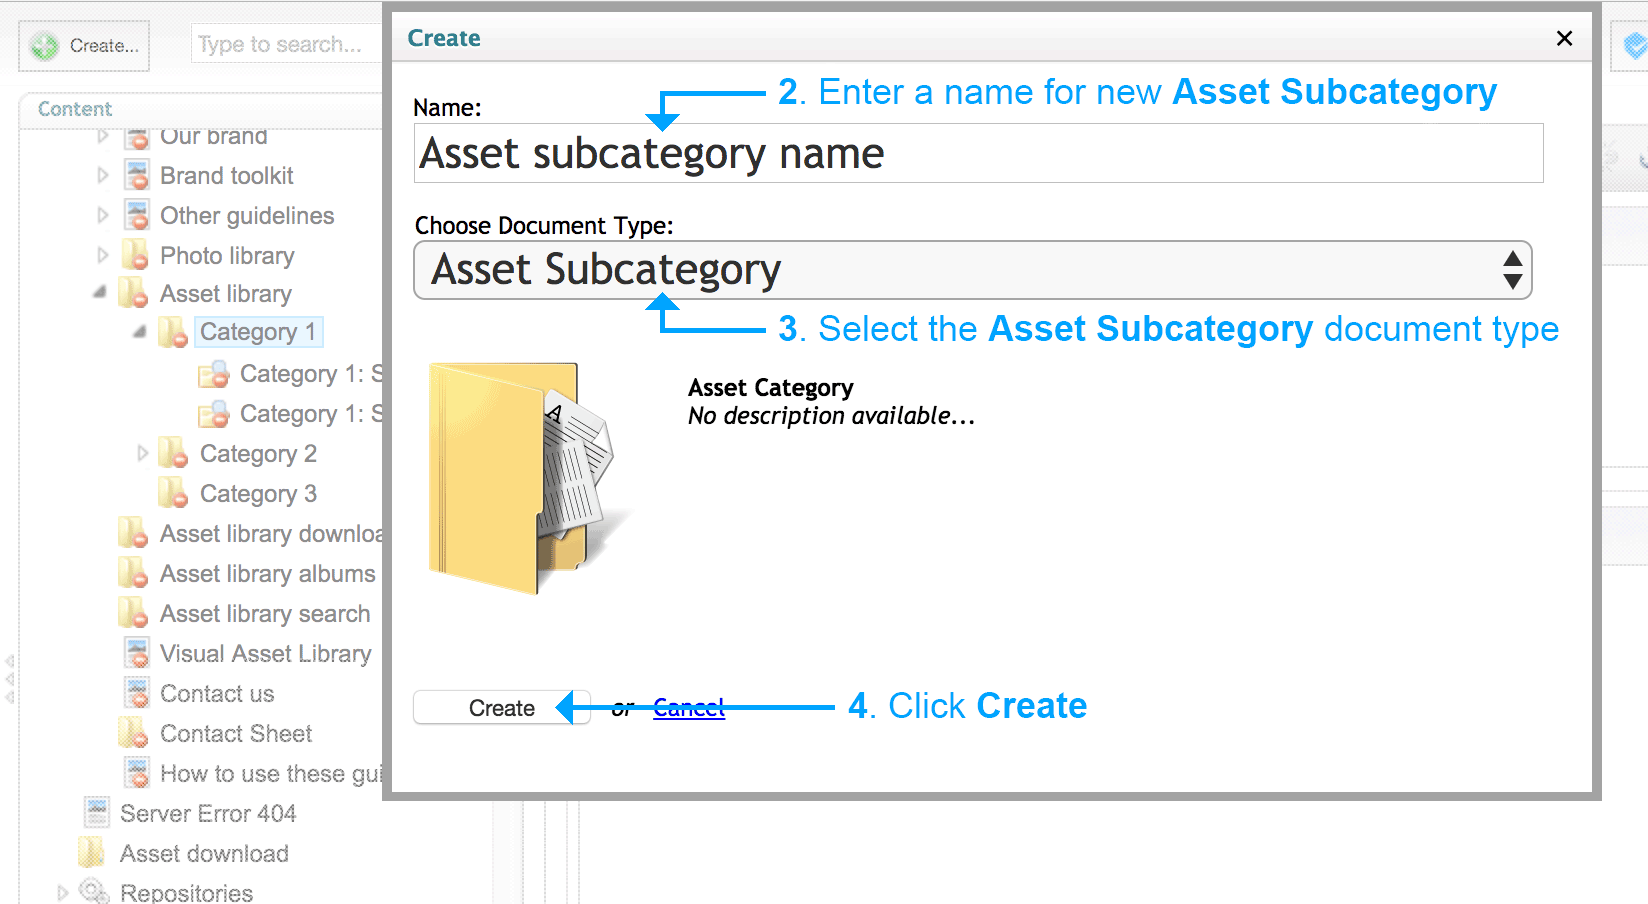 Step 2-4 – Enter a name and choose Asset Subcategory doc type